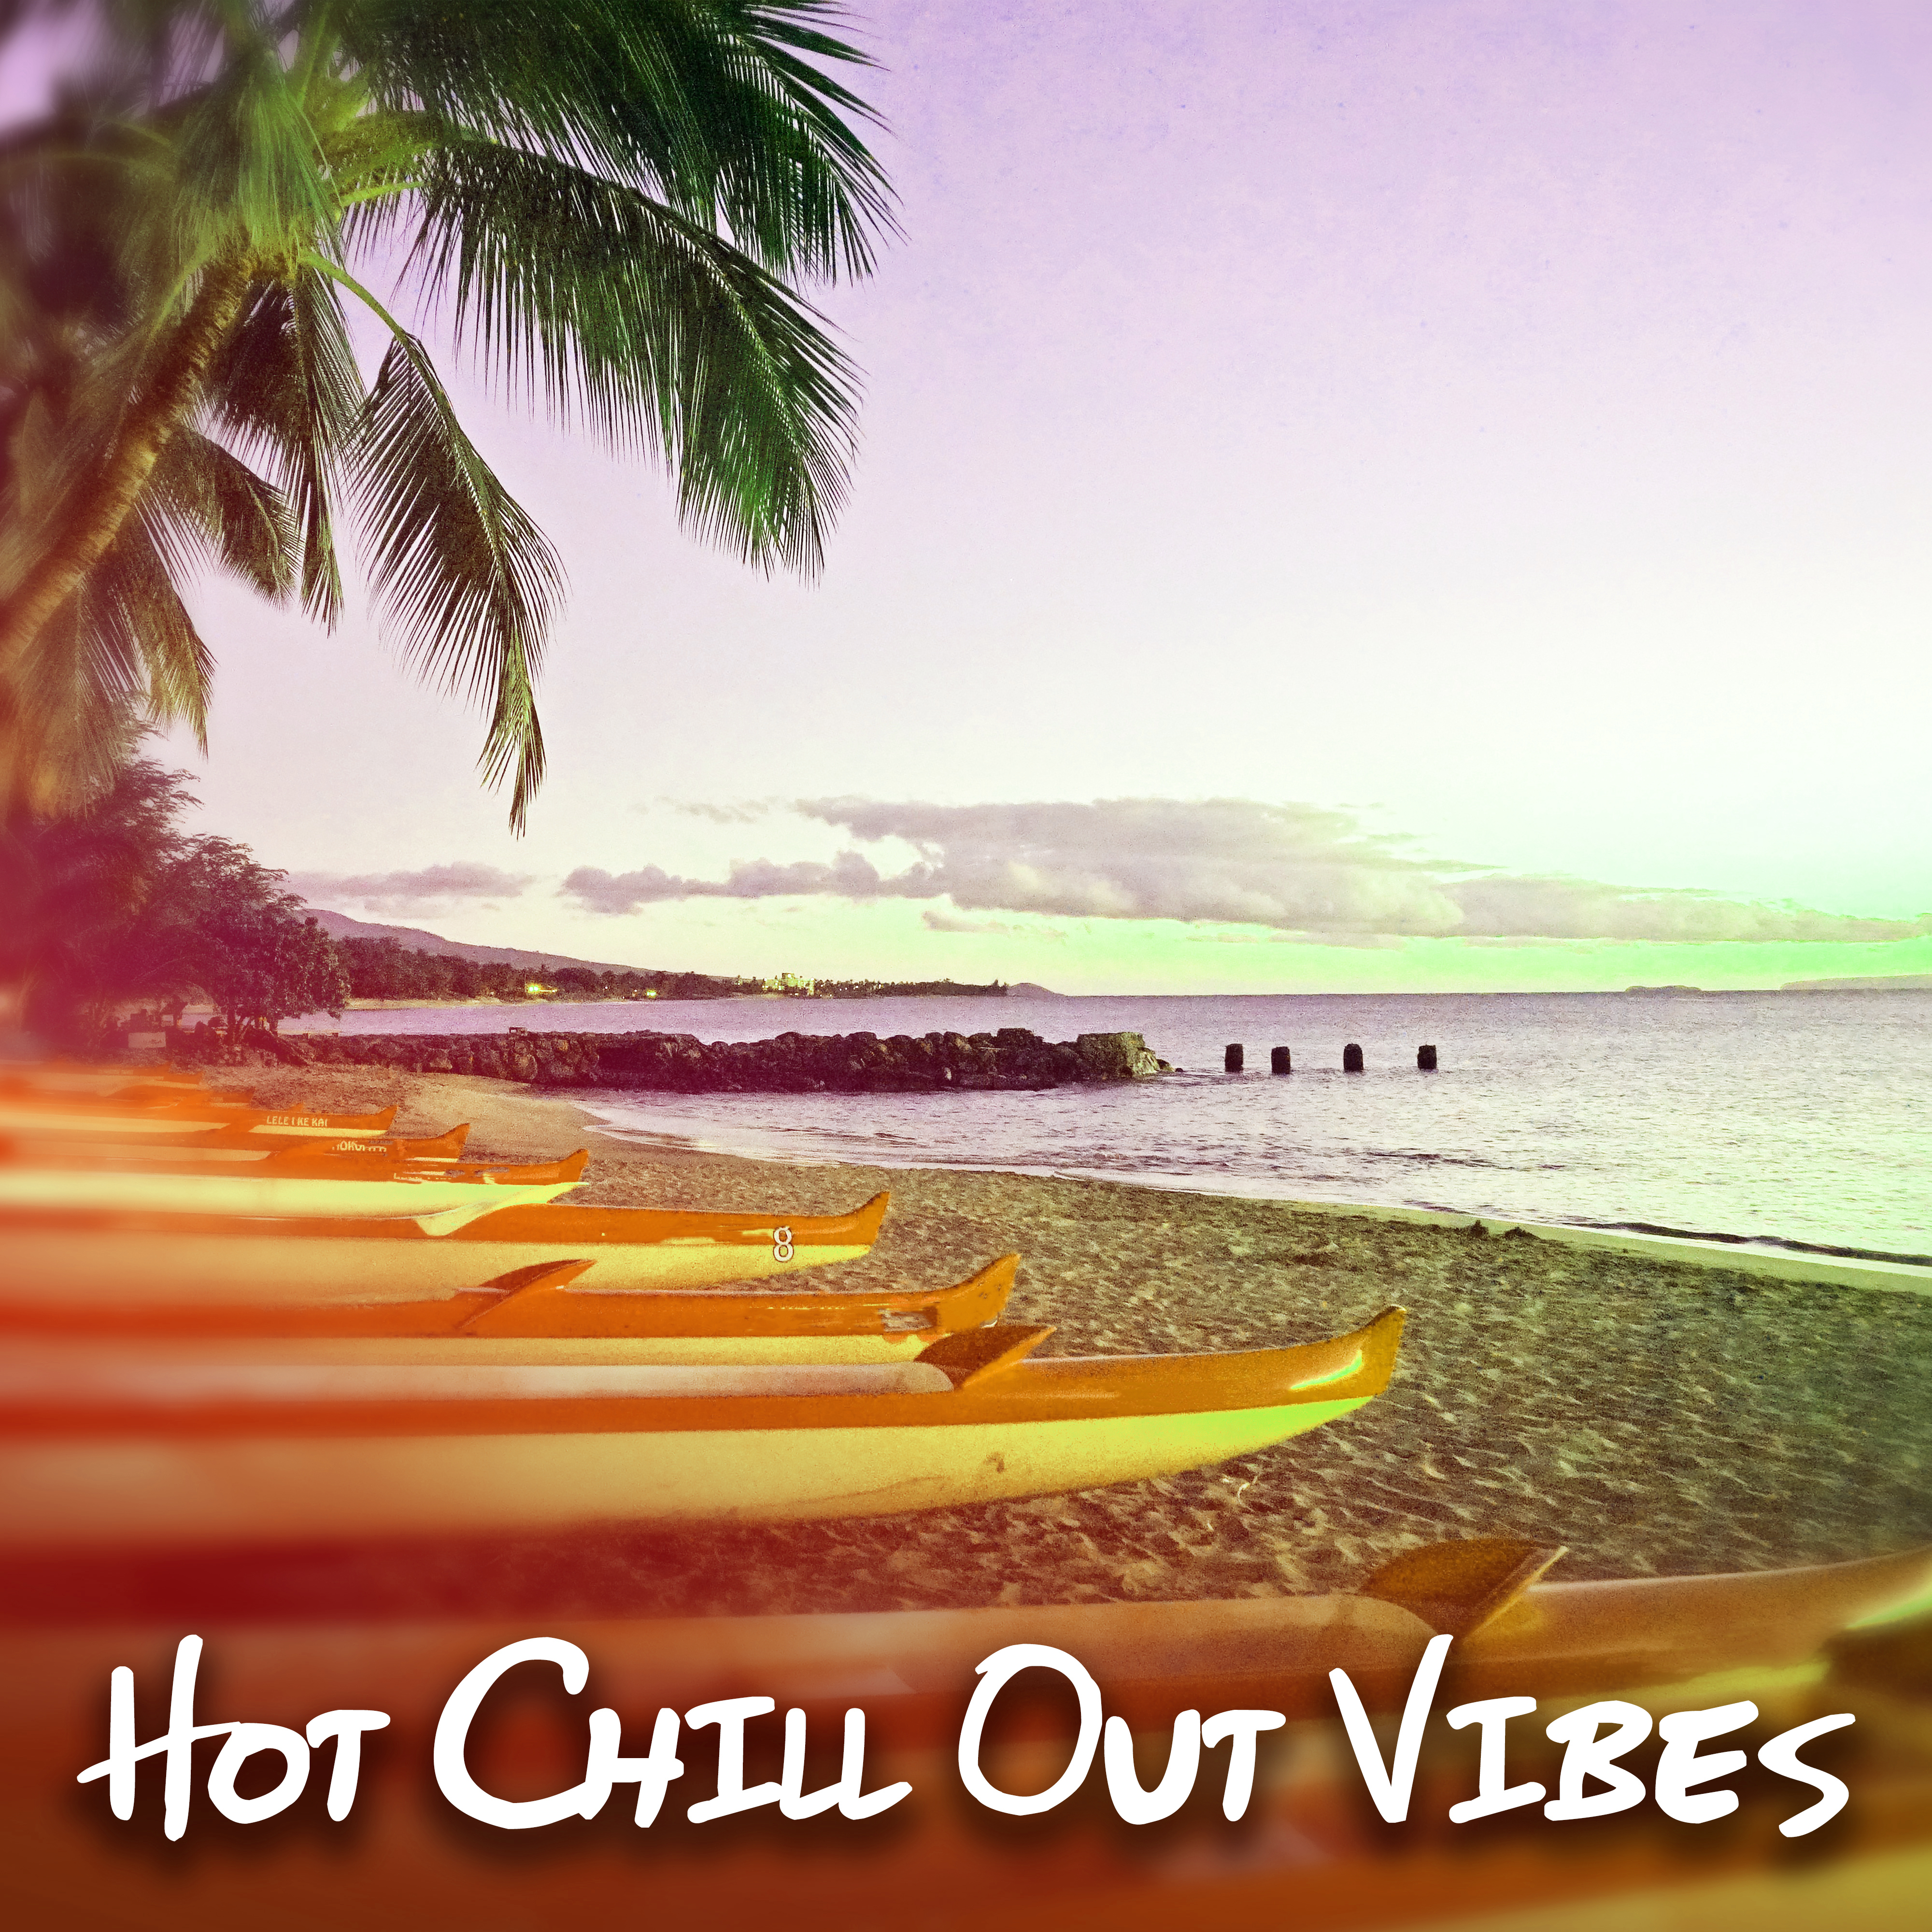 Hot Vibes